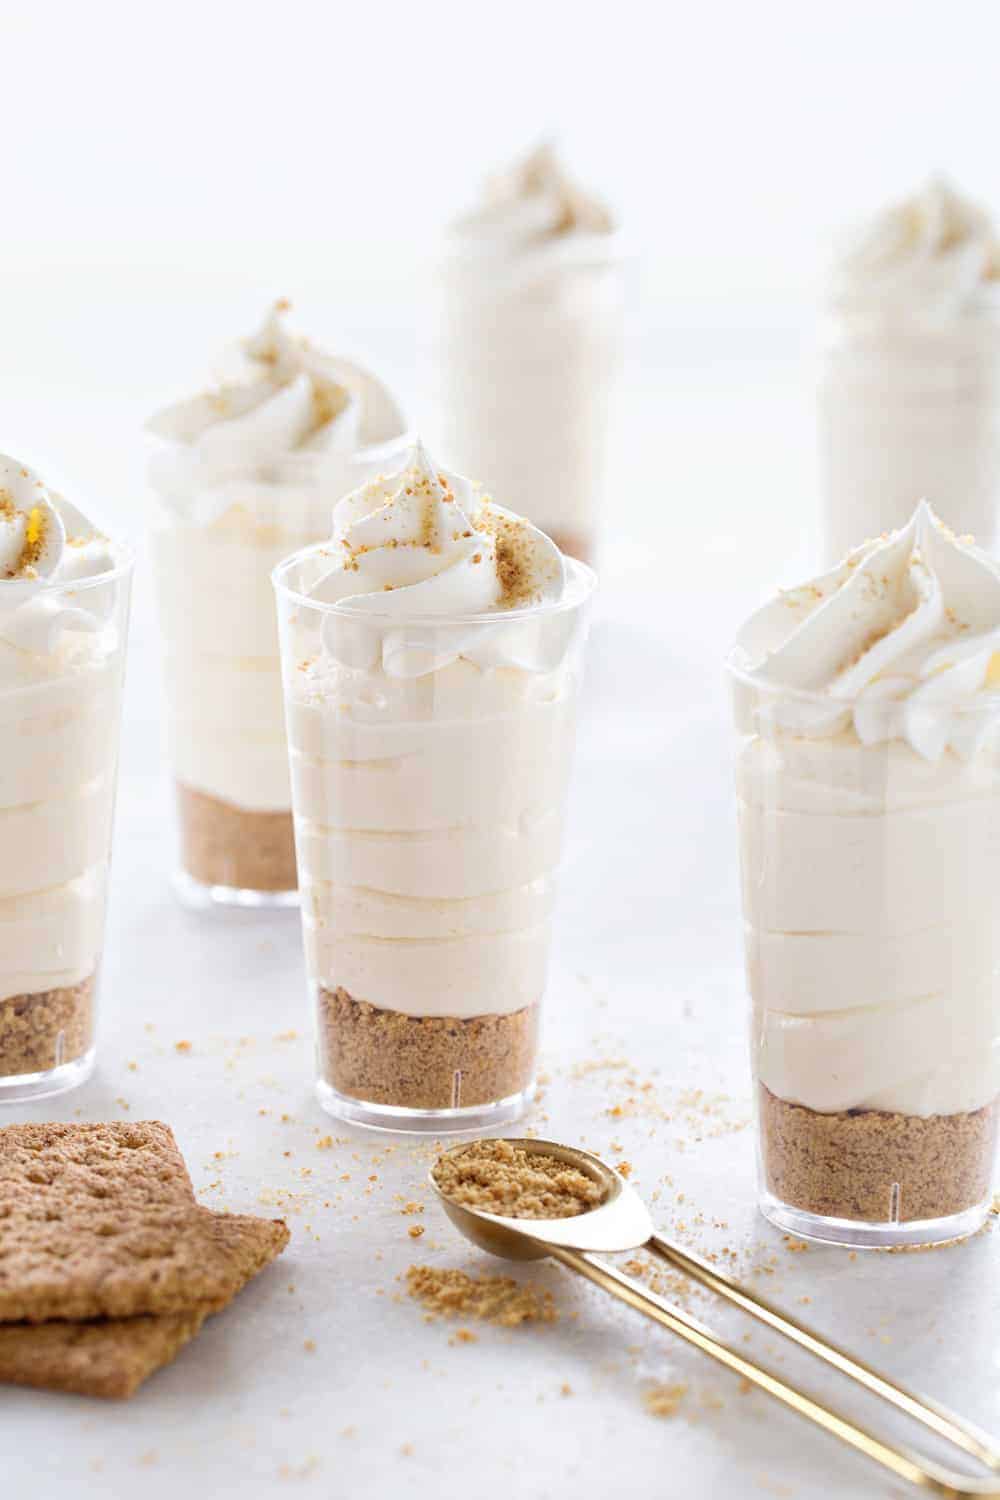 RumChata Cheesecake Pudding Shots come together with 5 simple ingredients. 